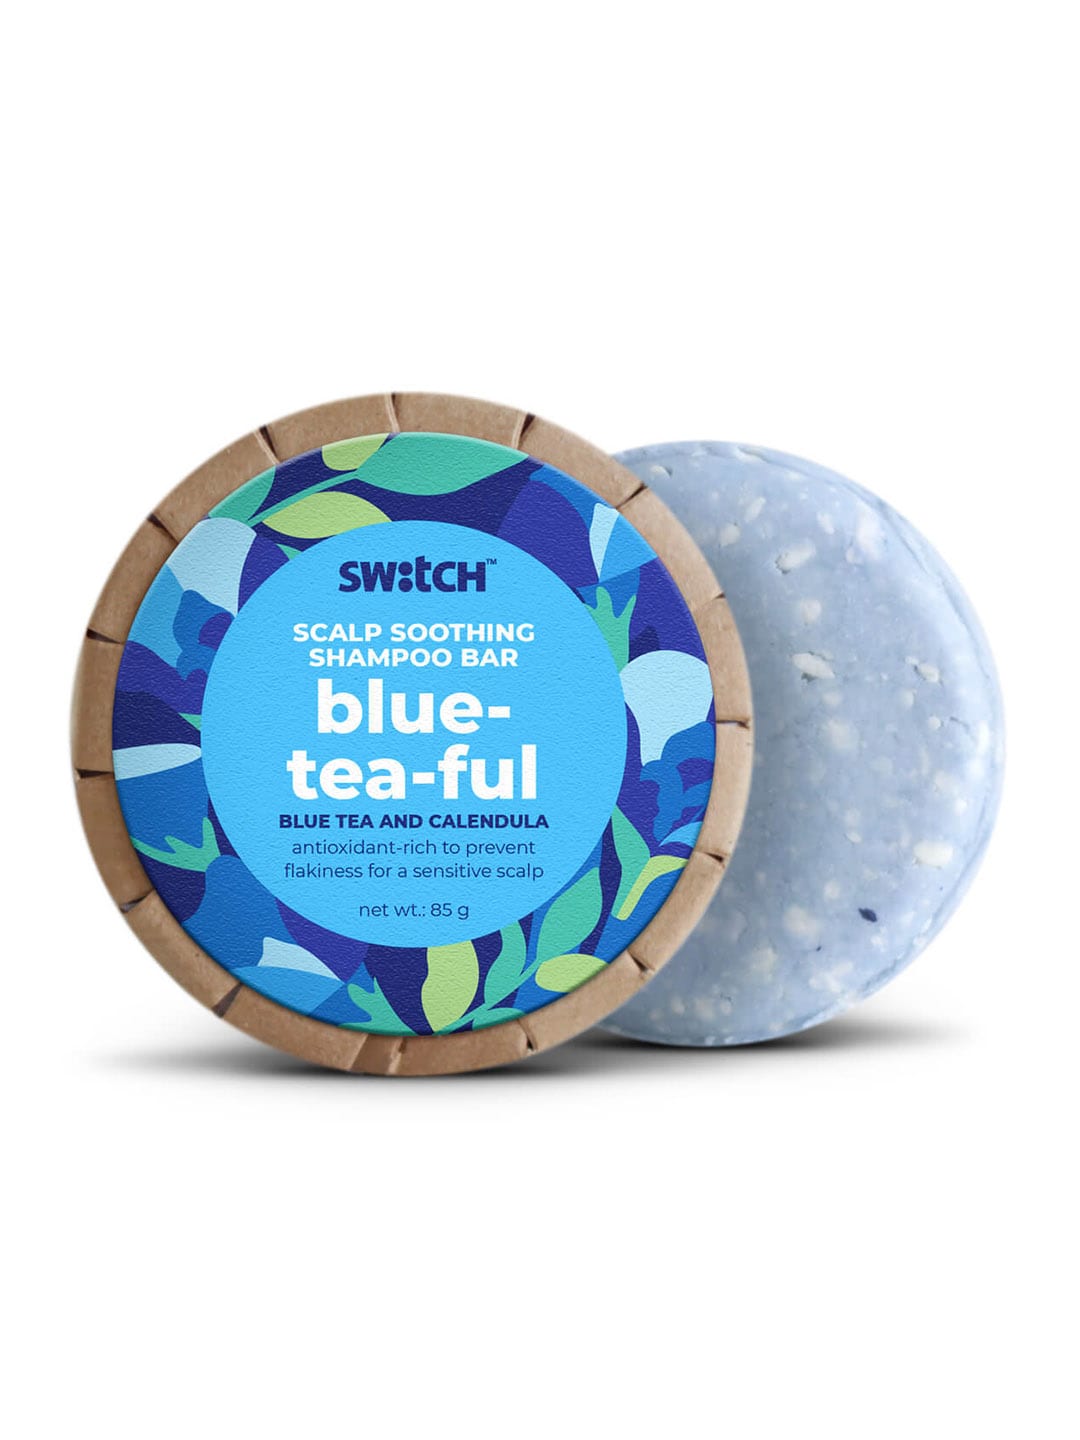 The Switch Fix Hair Soothing Blue-Tea-Ful Shampoo Bar for 50g Price in India